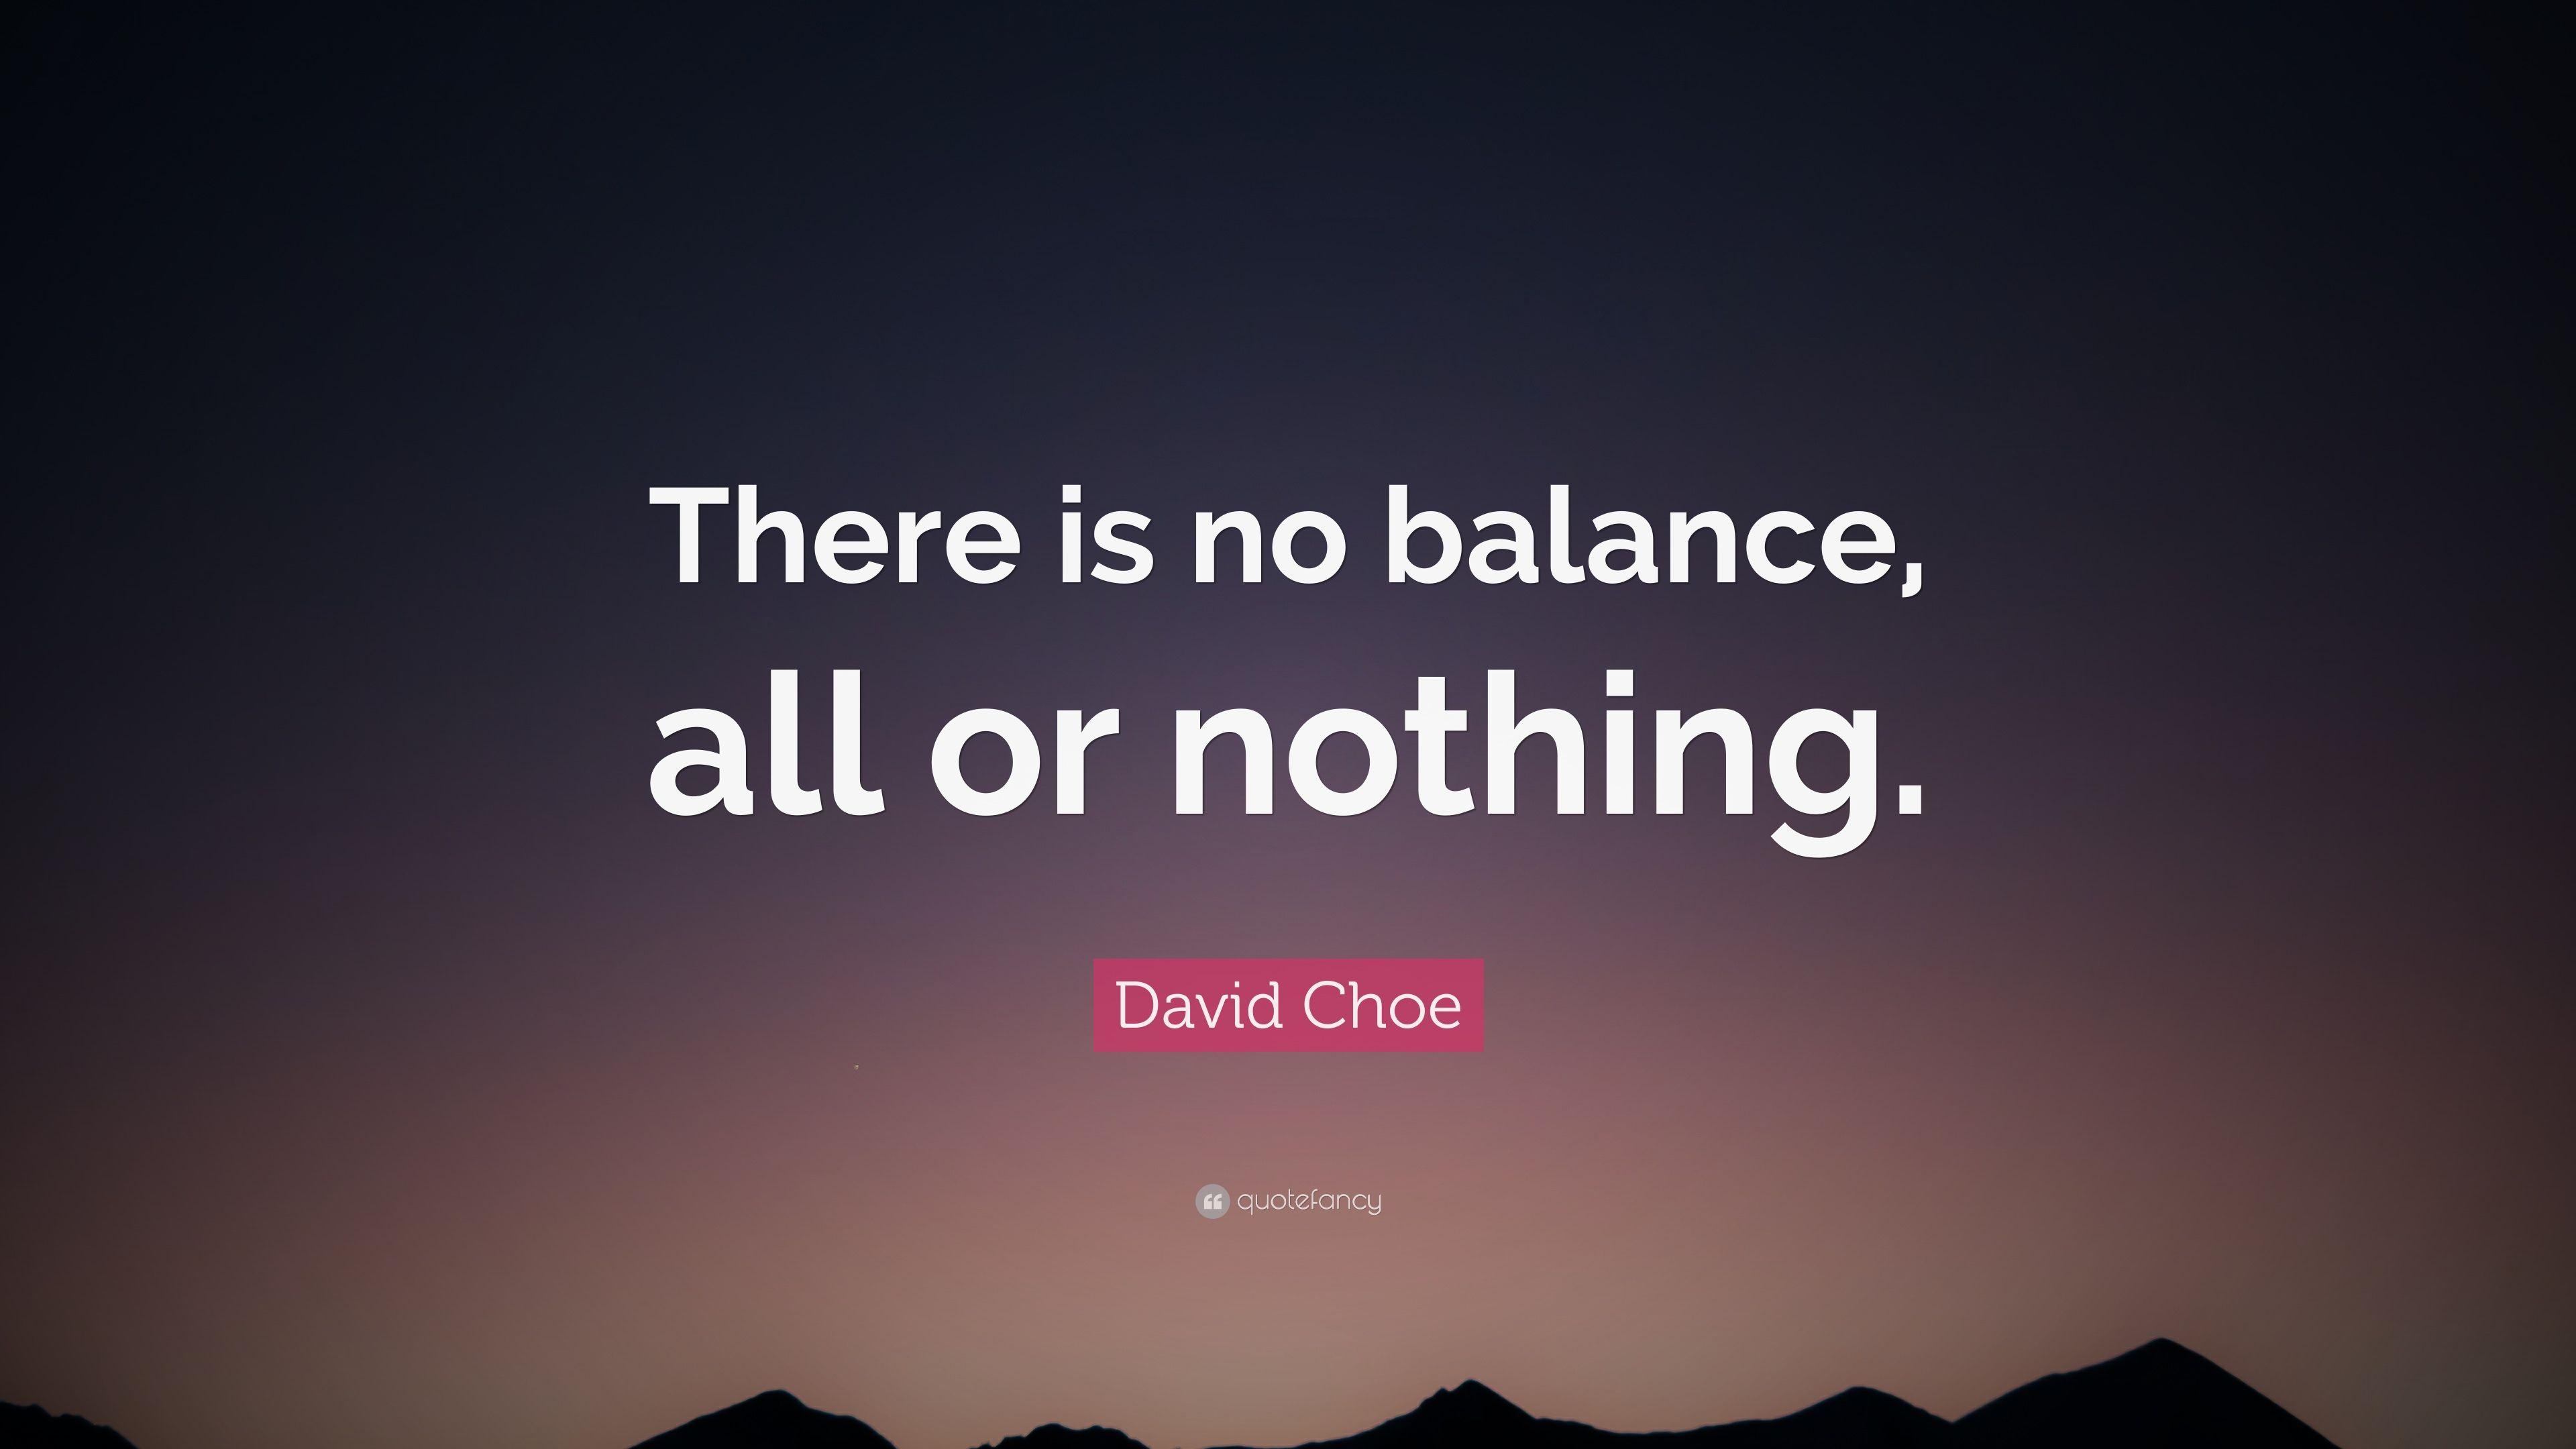 David Choe Quote: “There is no balance, all or nothing.” 12